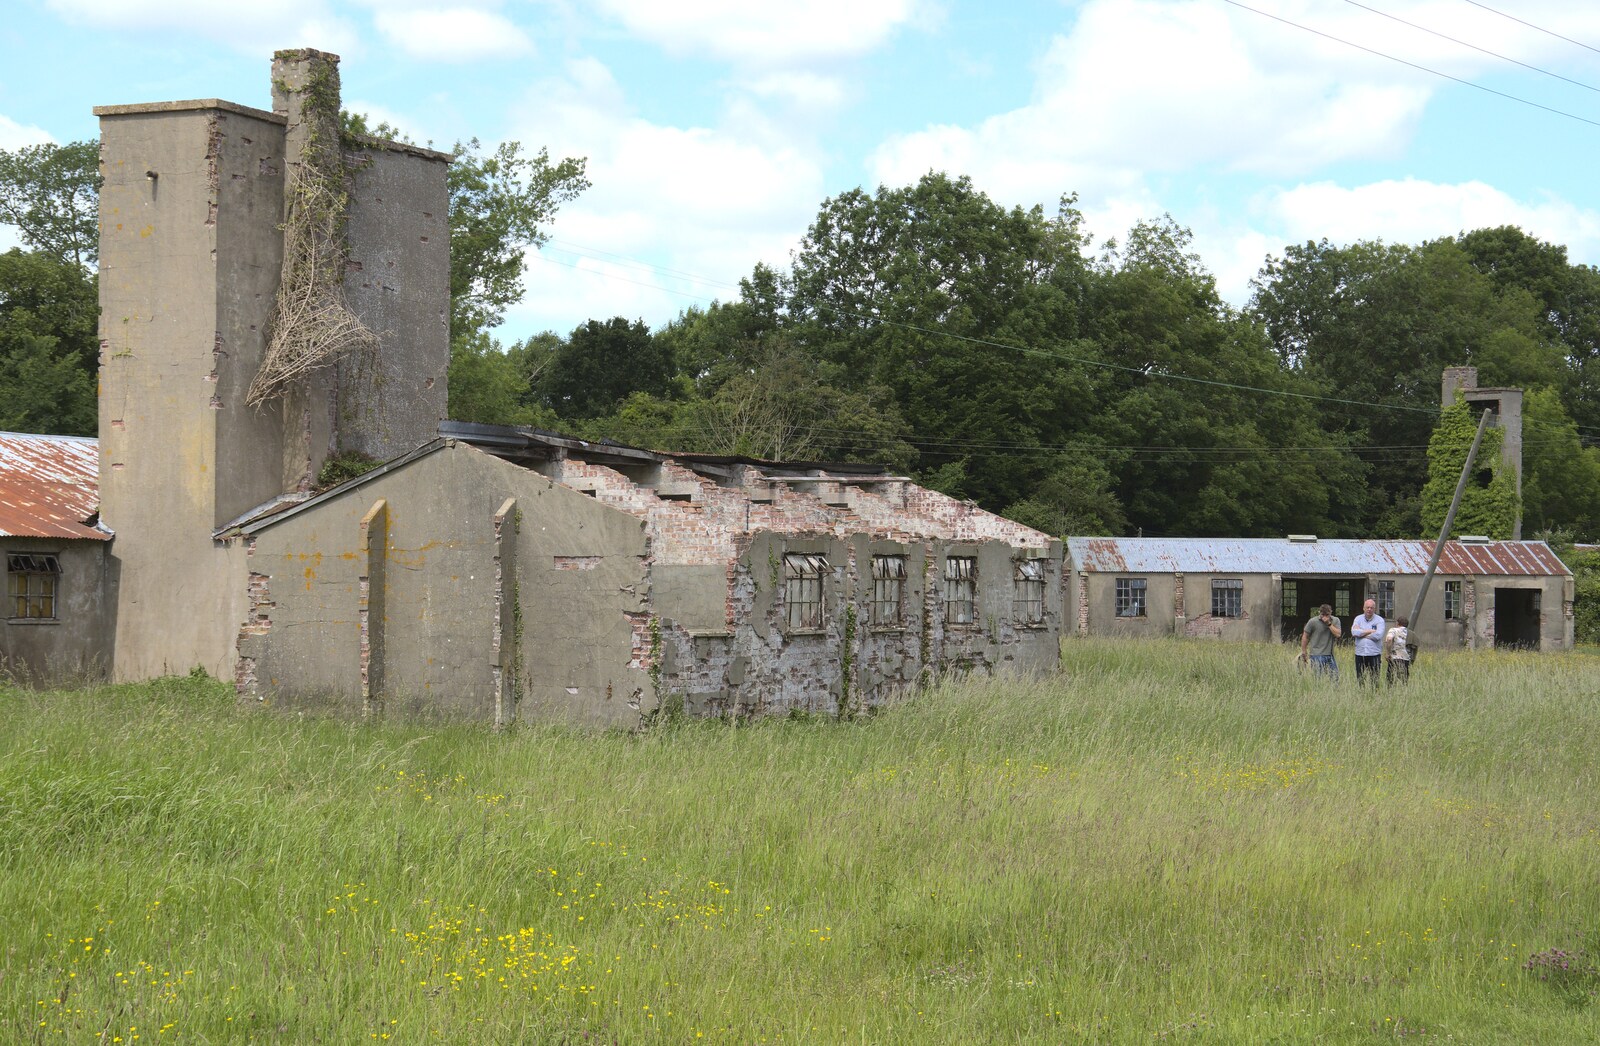 A roofless hut from A 1940s Timewarp, Site 4, Bungay Airfield, Flixton, Suffolk - 9th June 2022